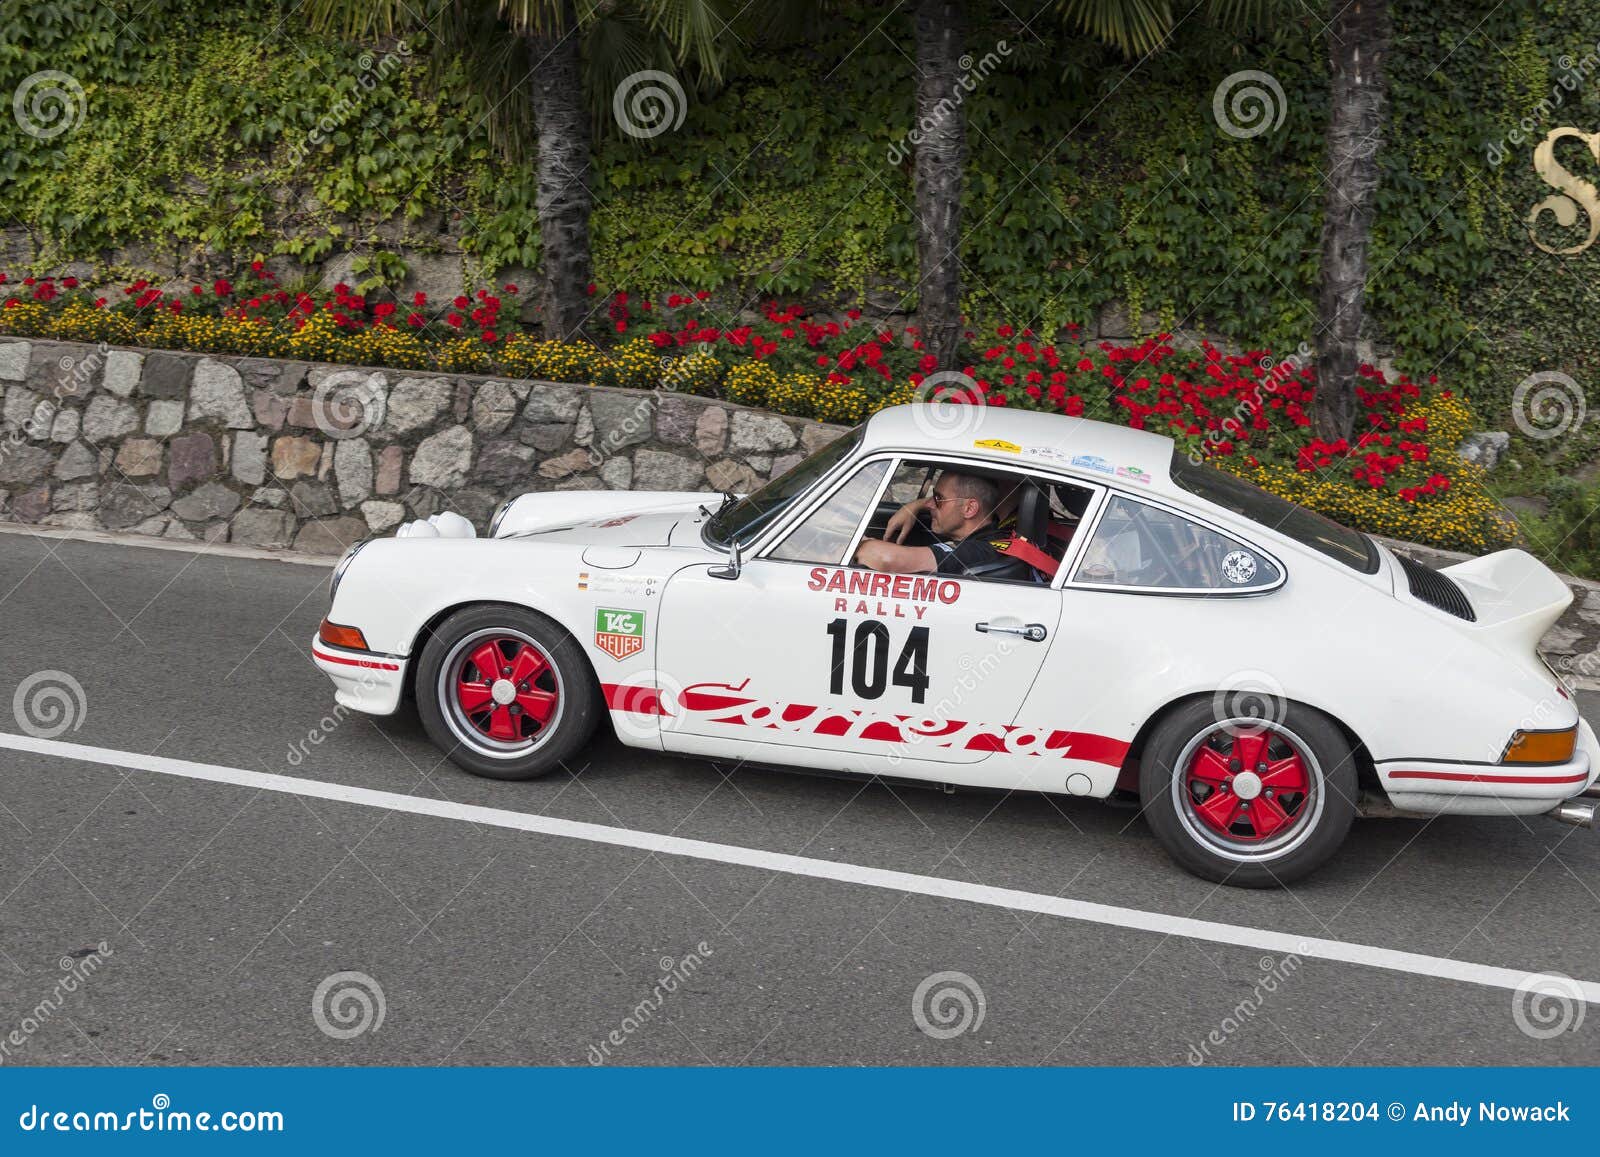 South Tyrol Rallye 2016_Porsche 911 Carrera 2-7 RS Editorial Stock Image -  Image of road, sports: 76418204